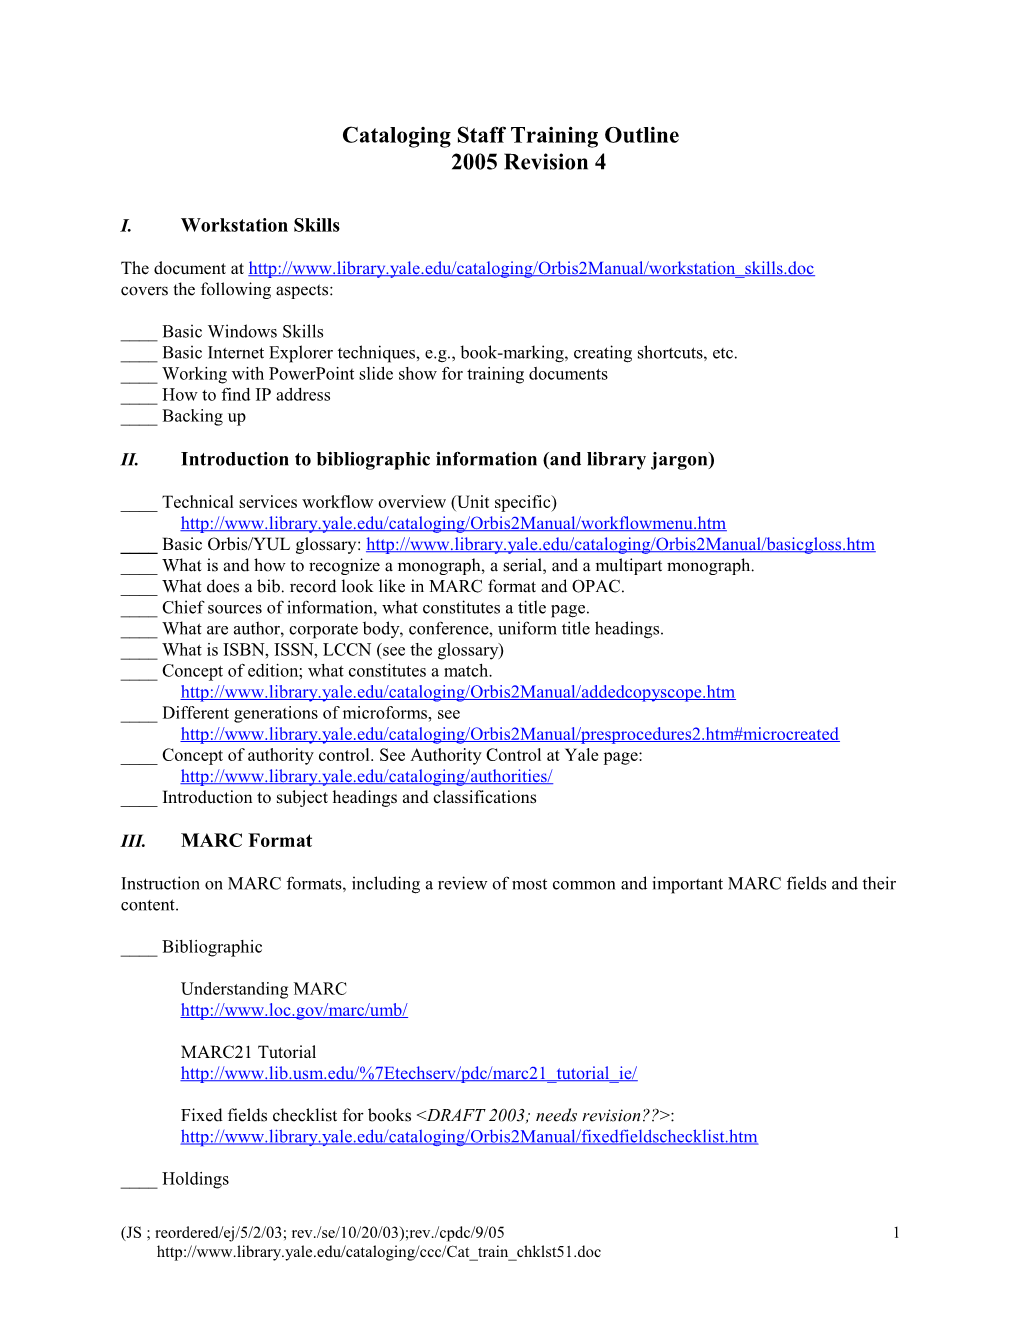 Voyager Training for Cataloging Staff - Checklist (Reordered/Ej/5/2/03)